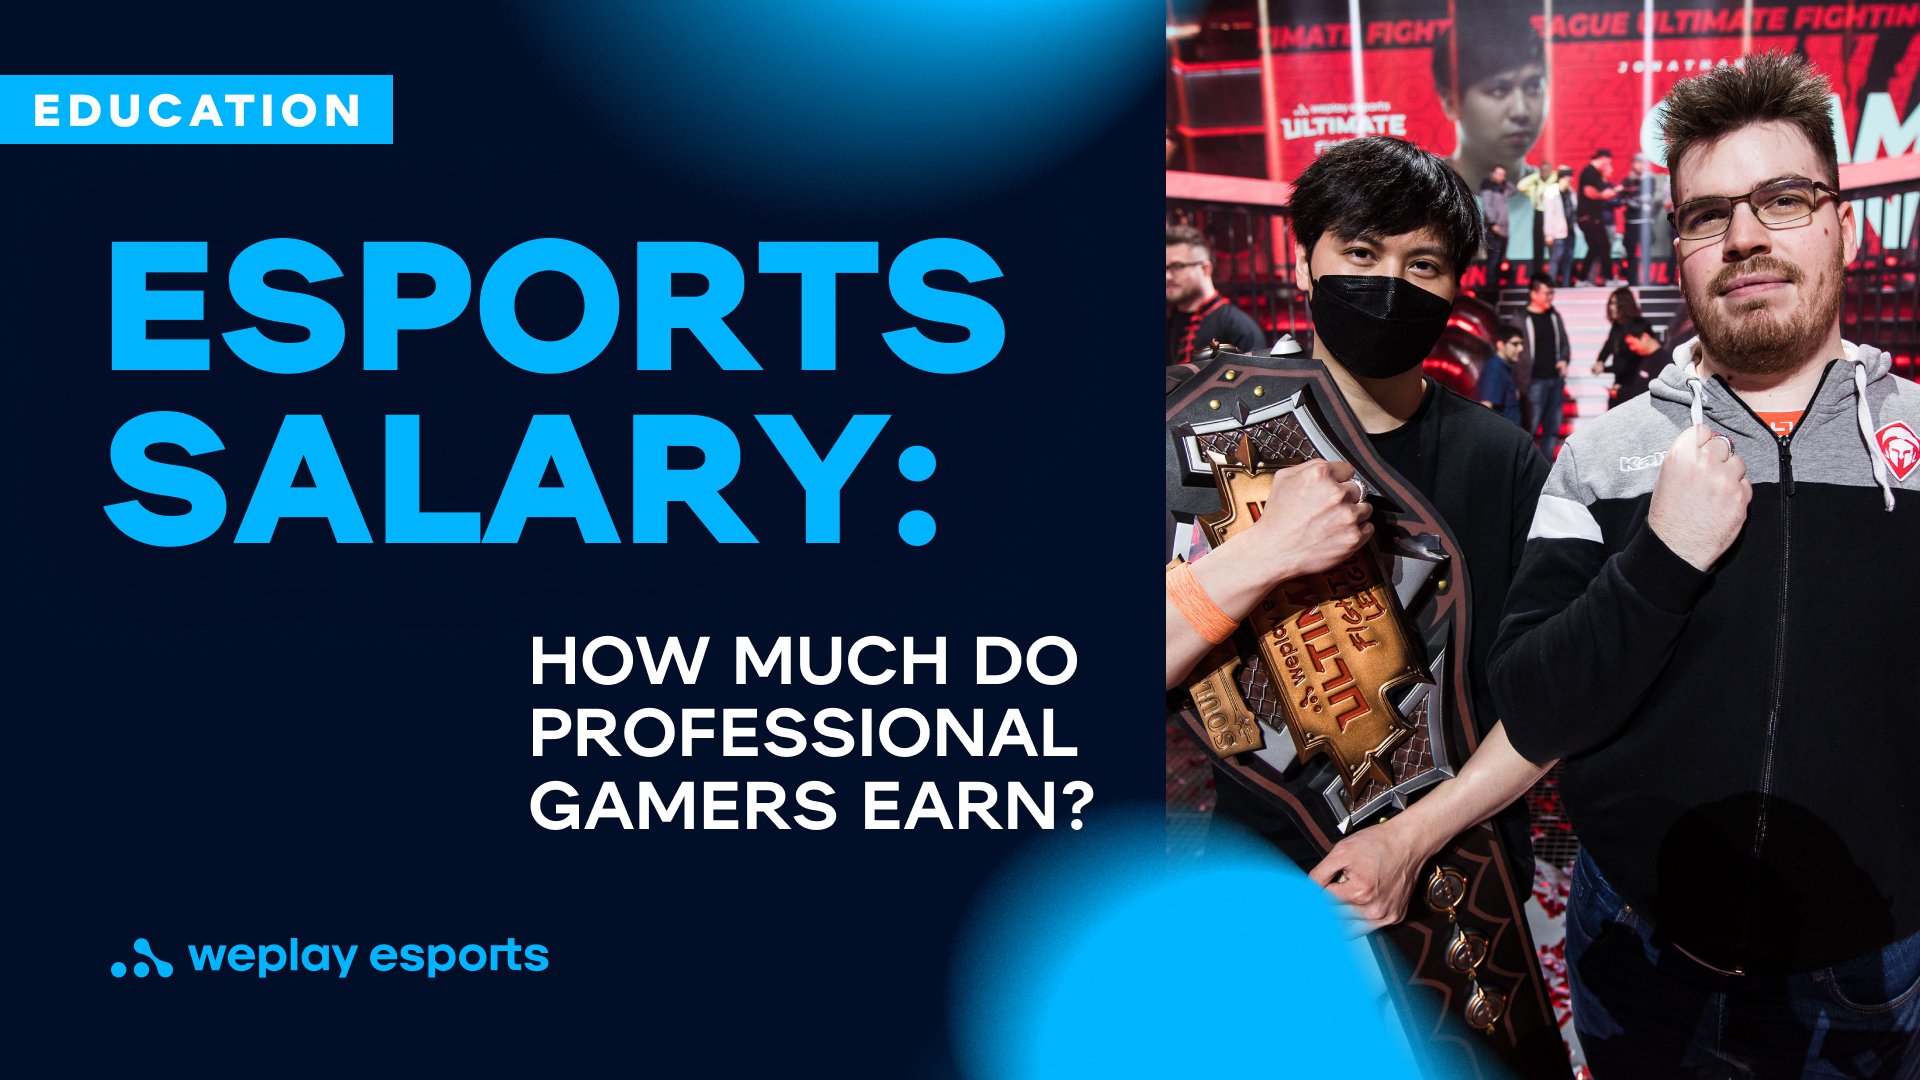 Esports salary: how much do professional gamers earn? Source: WePlay Holding